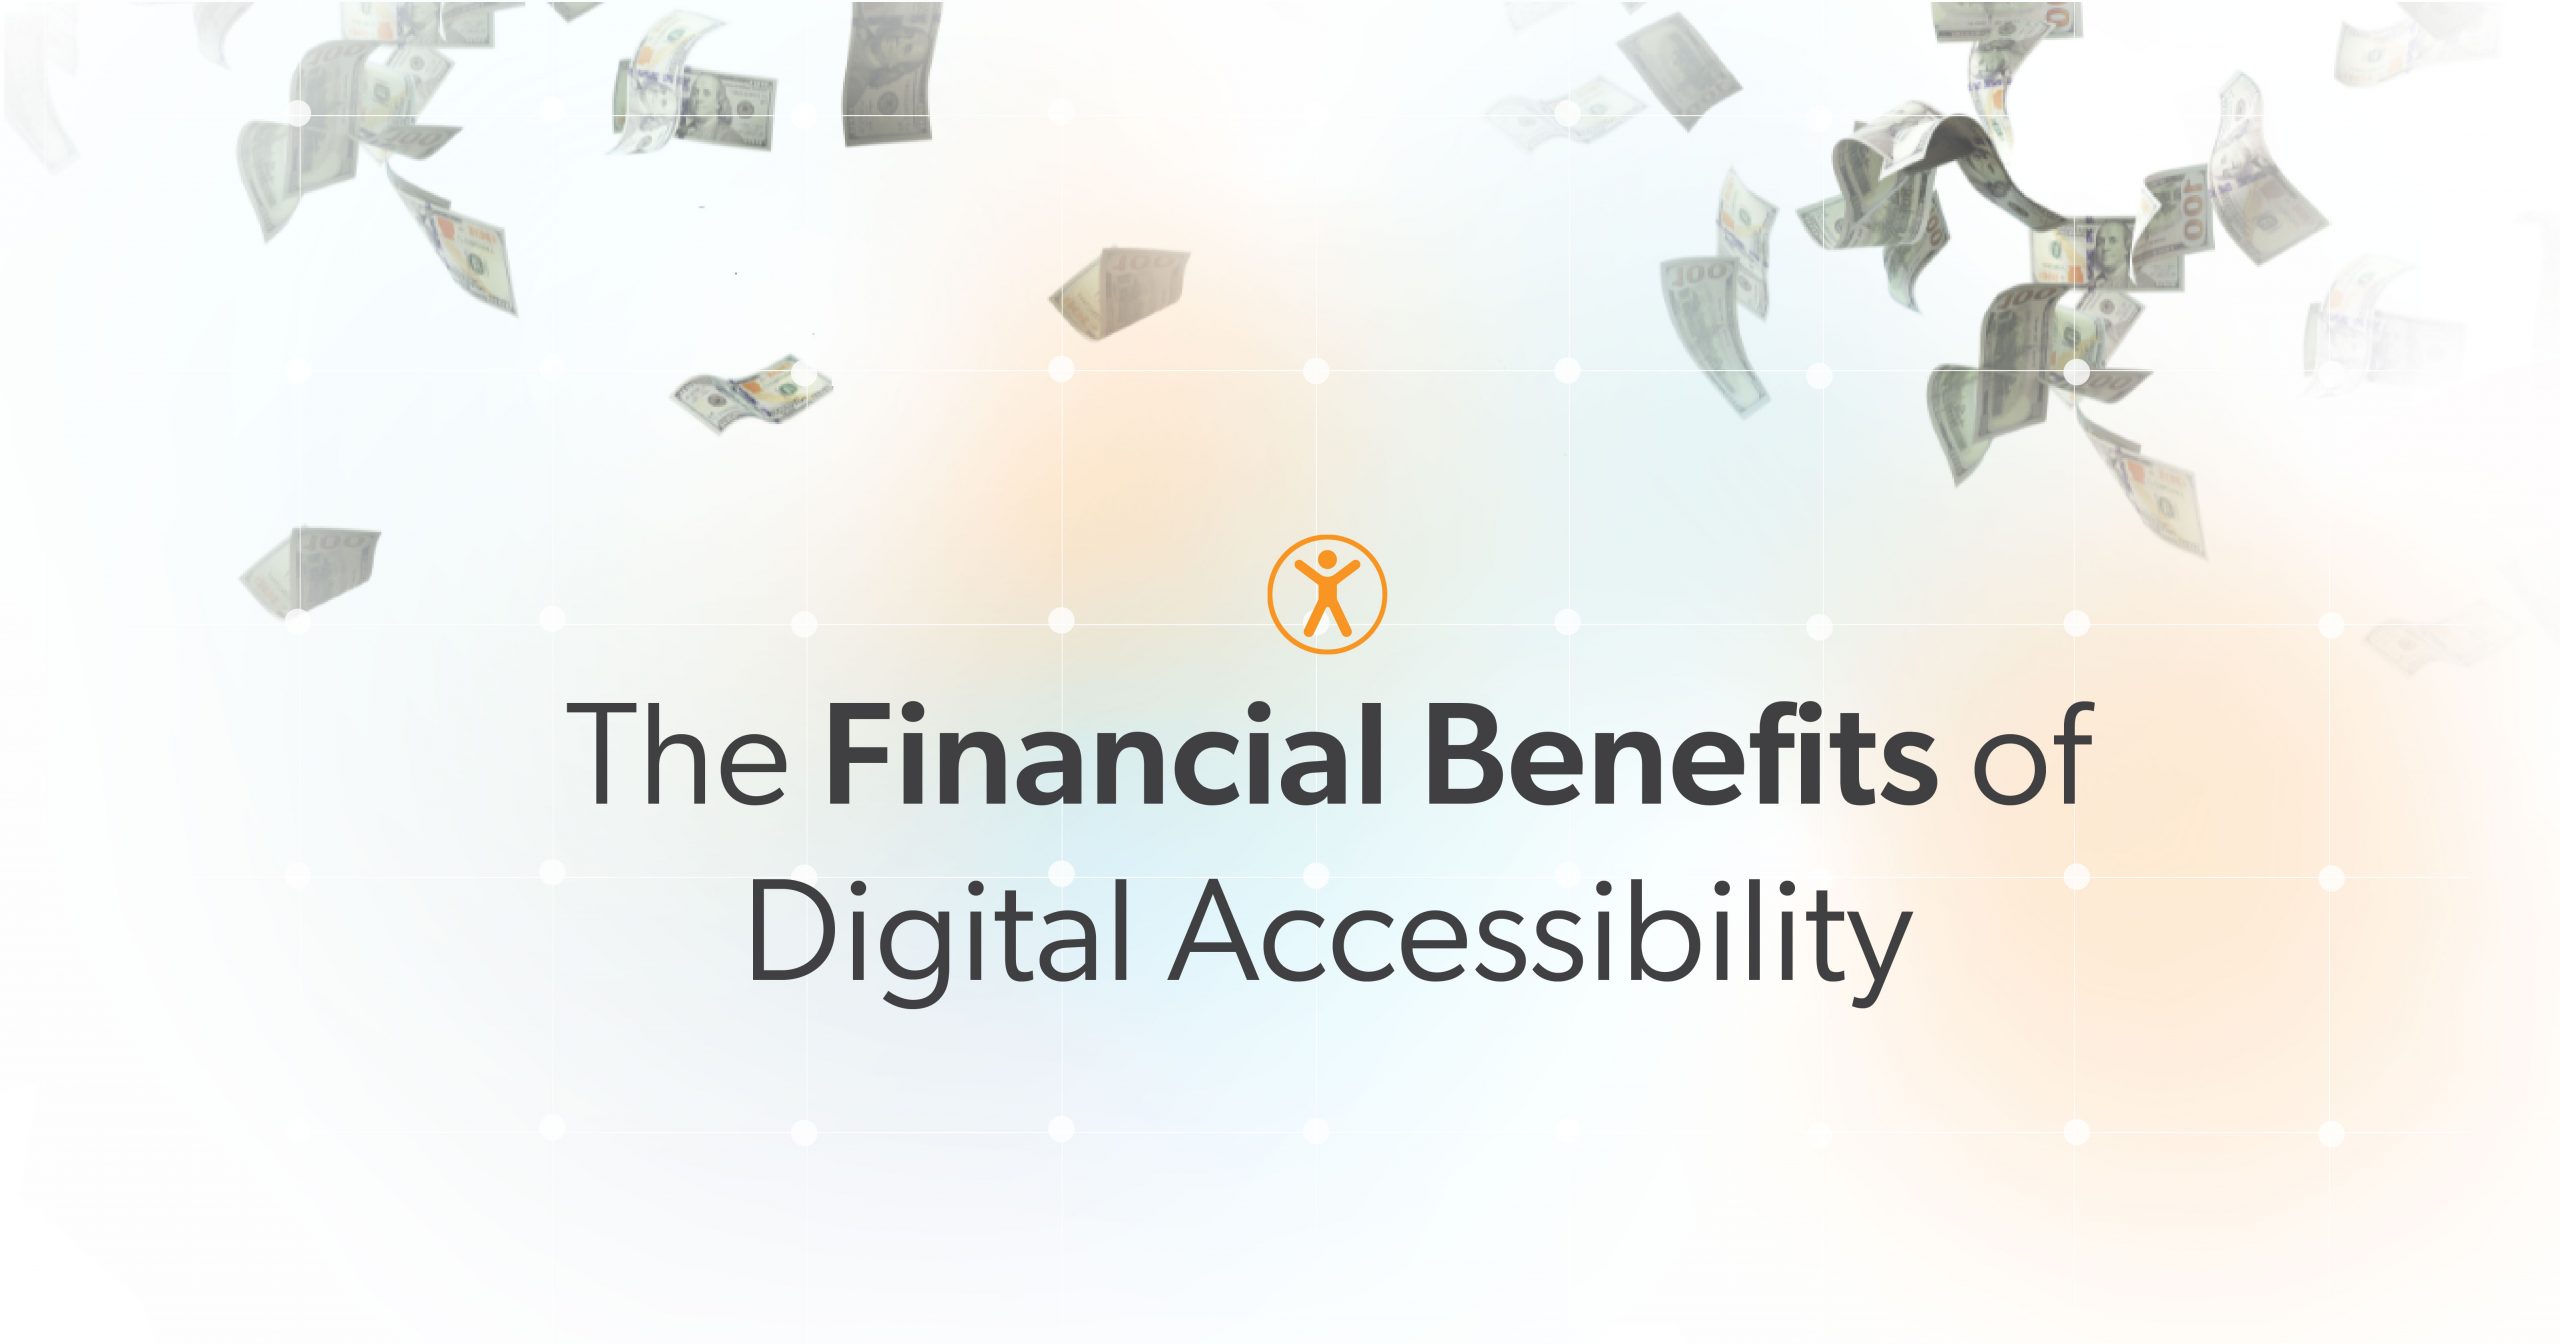 The Financial Benefits of Digital Accessibility